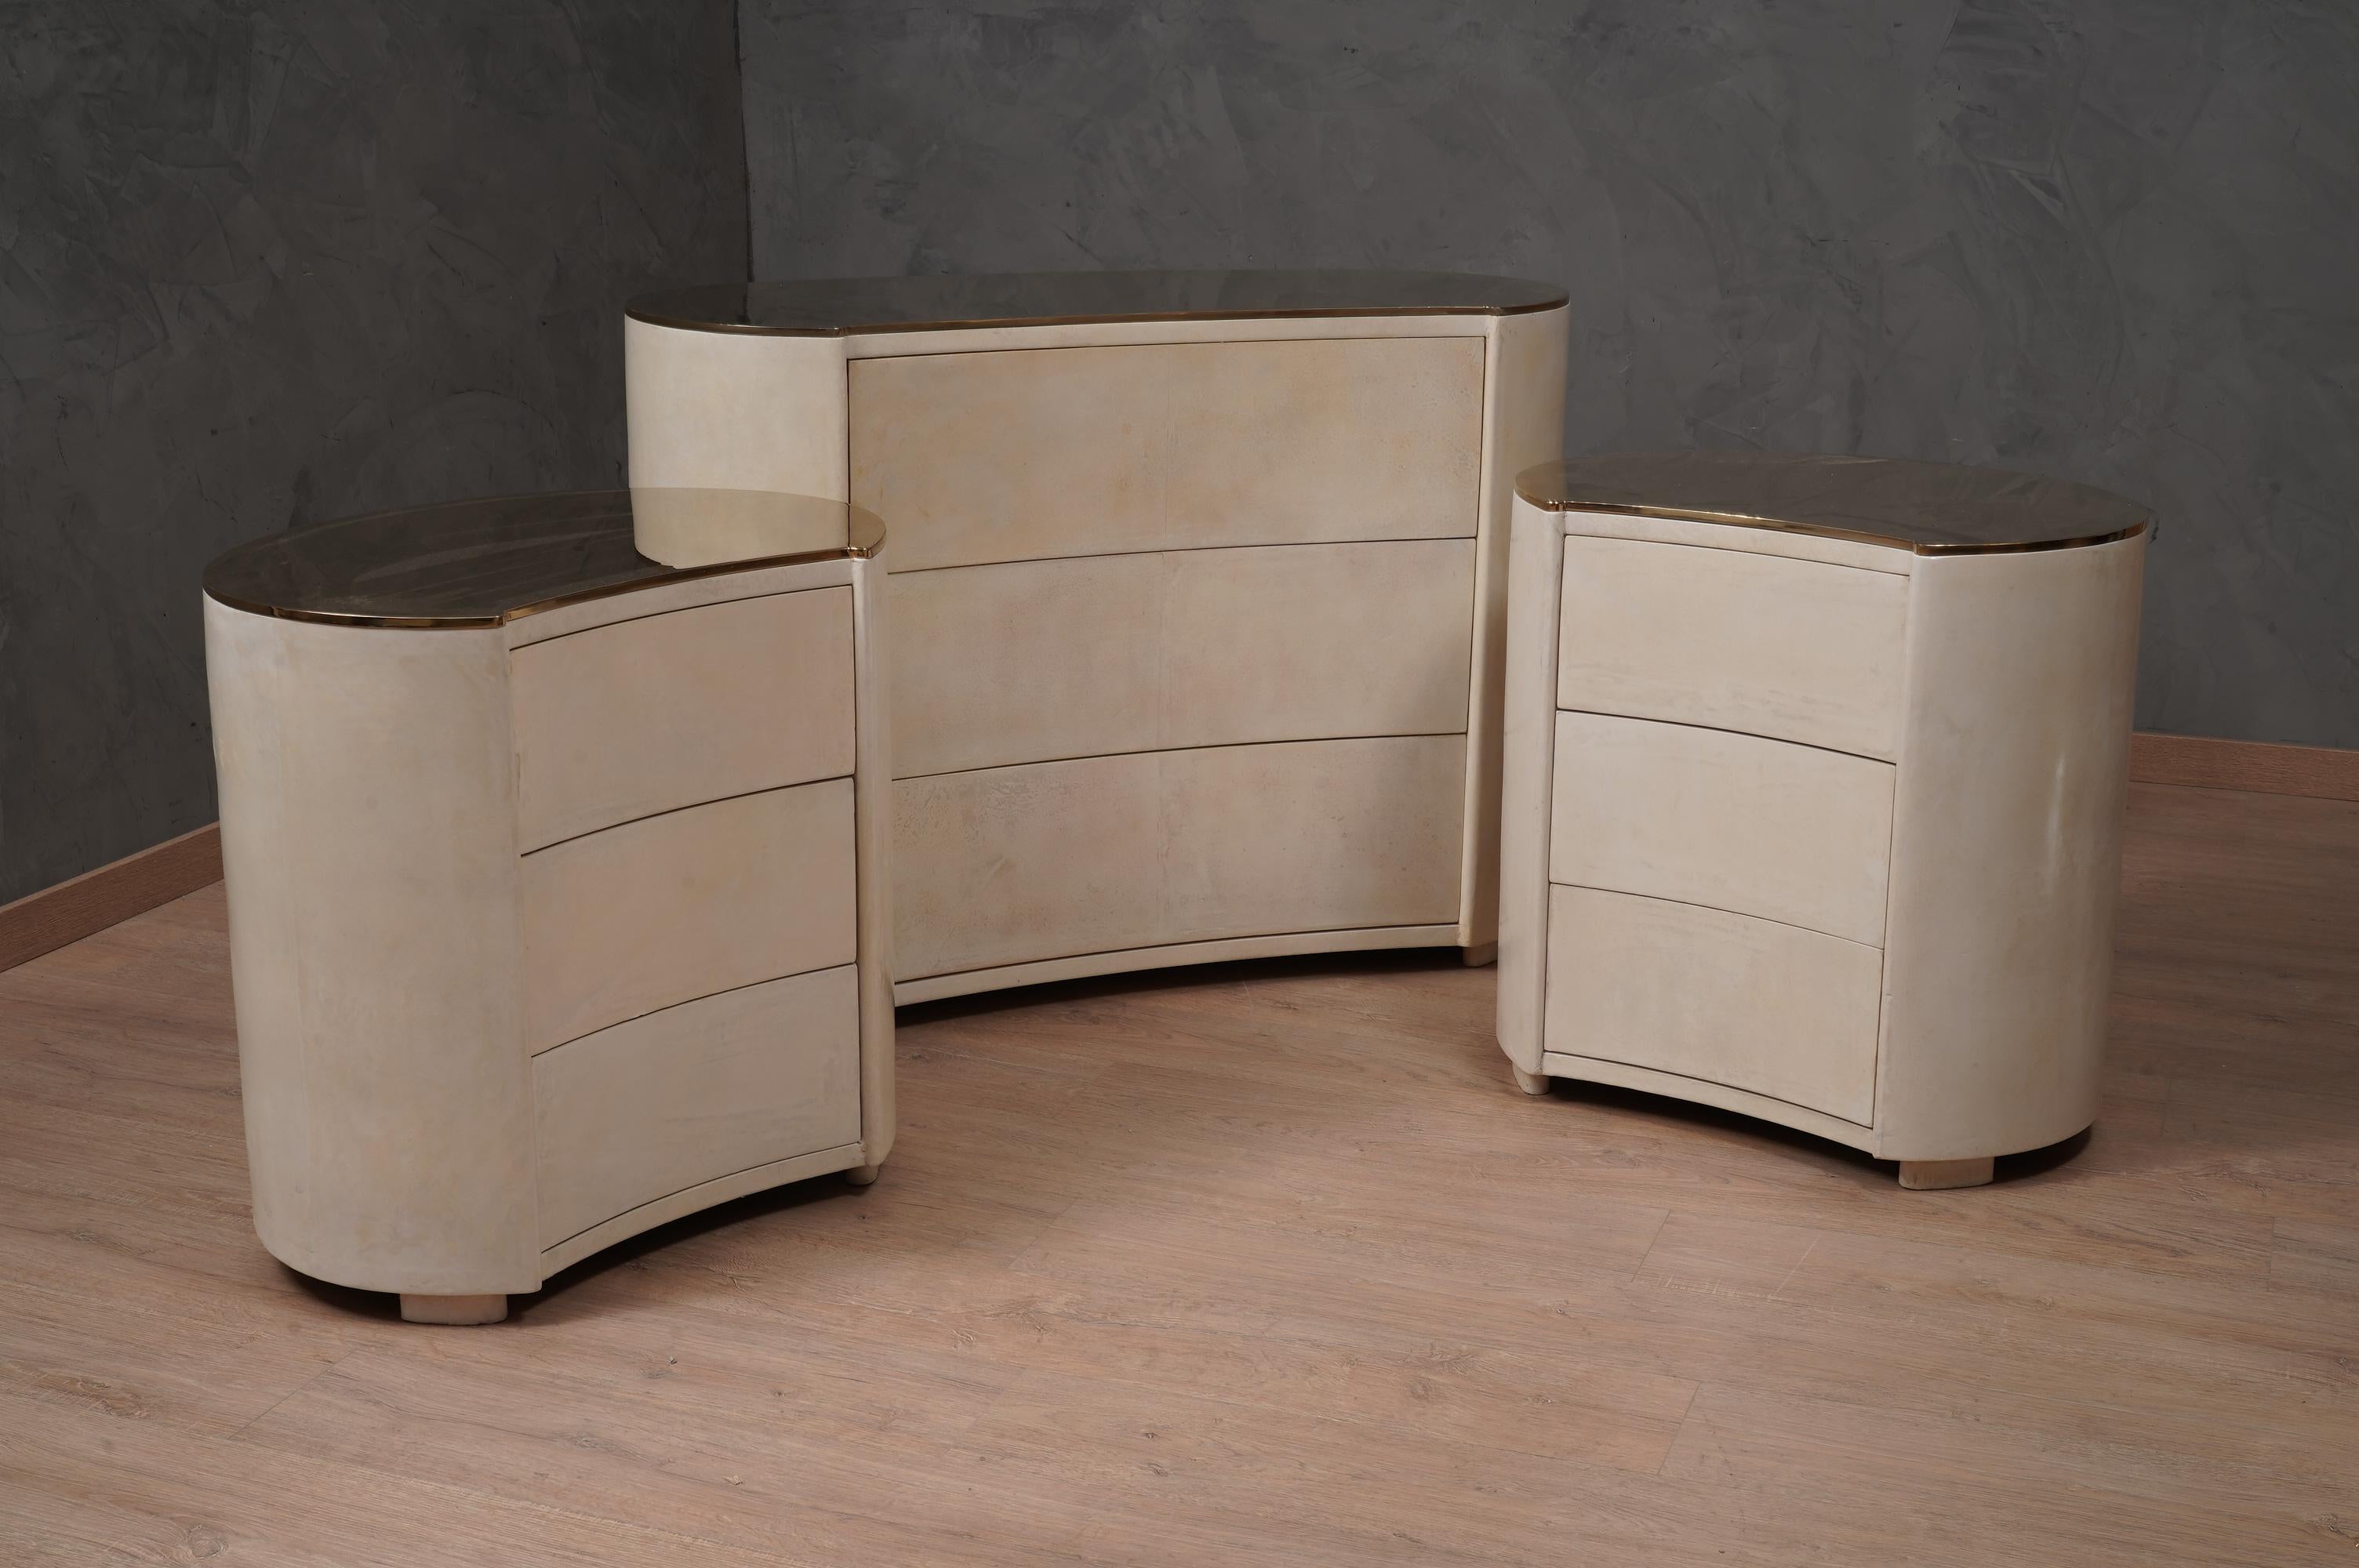 Refinement and style characterize this chest of drawers, a very charismatic design makes the commode truly elegant. In true mid-century Italian style. A fine and distinct taste.

The chest of drawers has a very particular design, its rounded shape